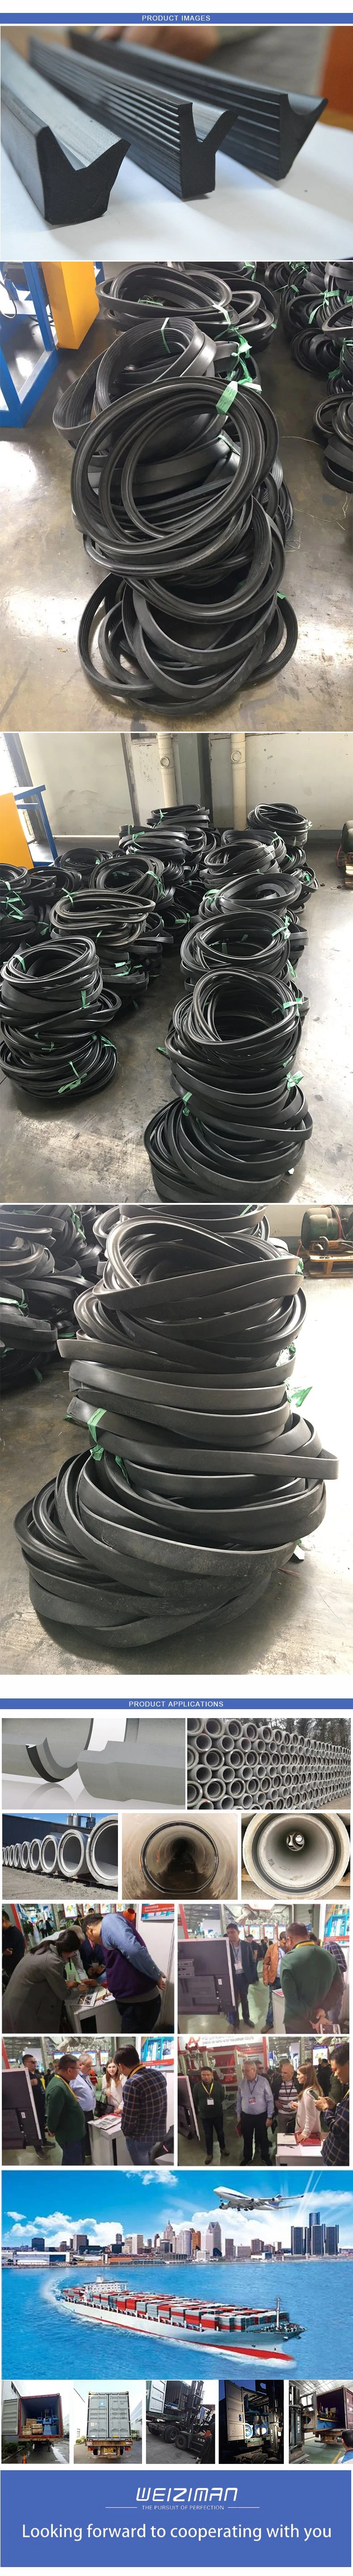 Embedded Integrated Rubber Seal for Precast Concrete Pipes